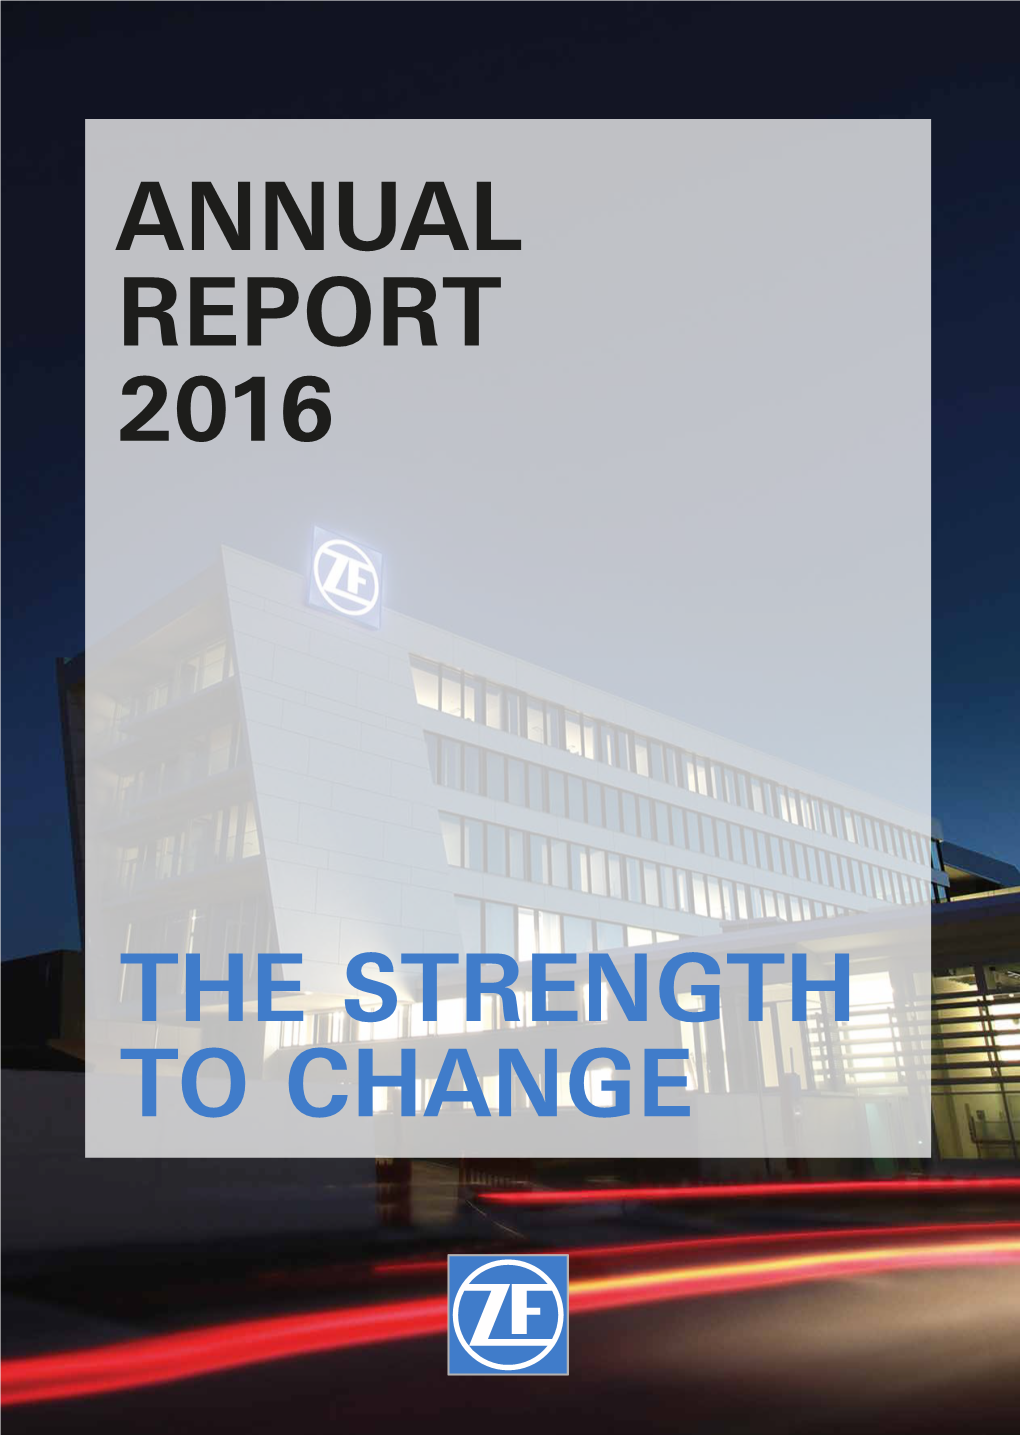 Annual Report 2016 2016 Report Annual to Change to the Strength